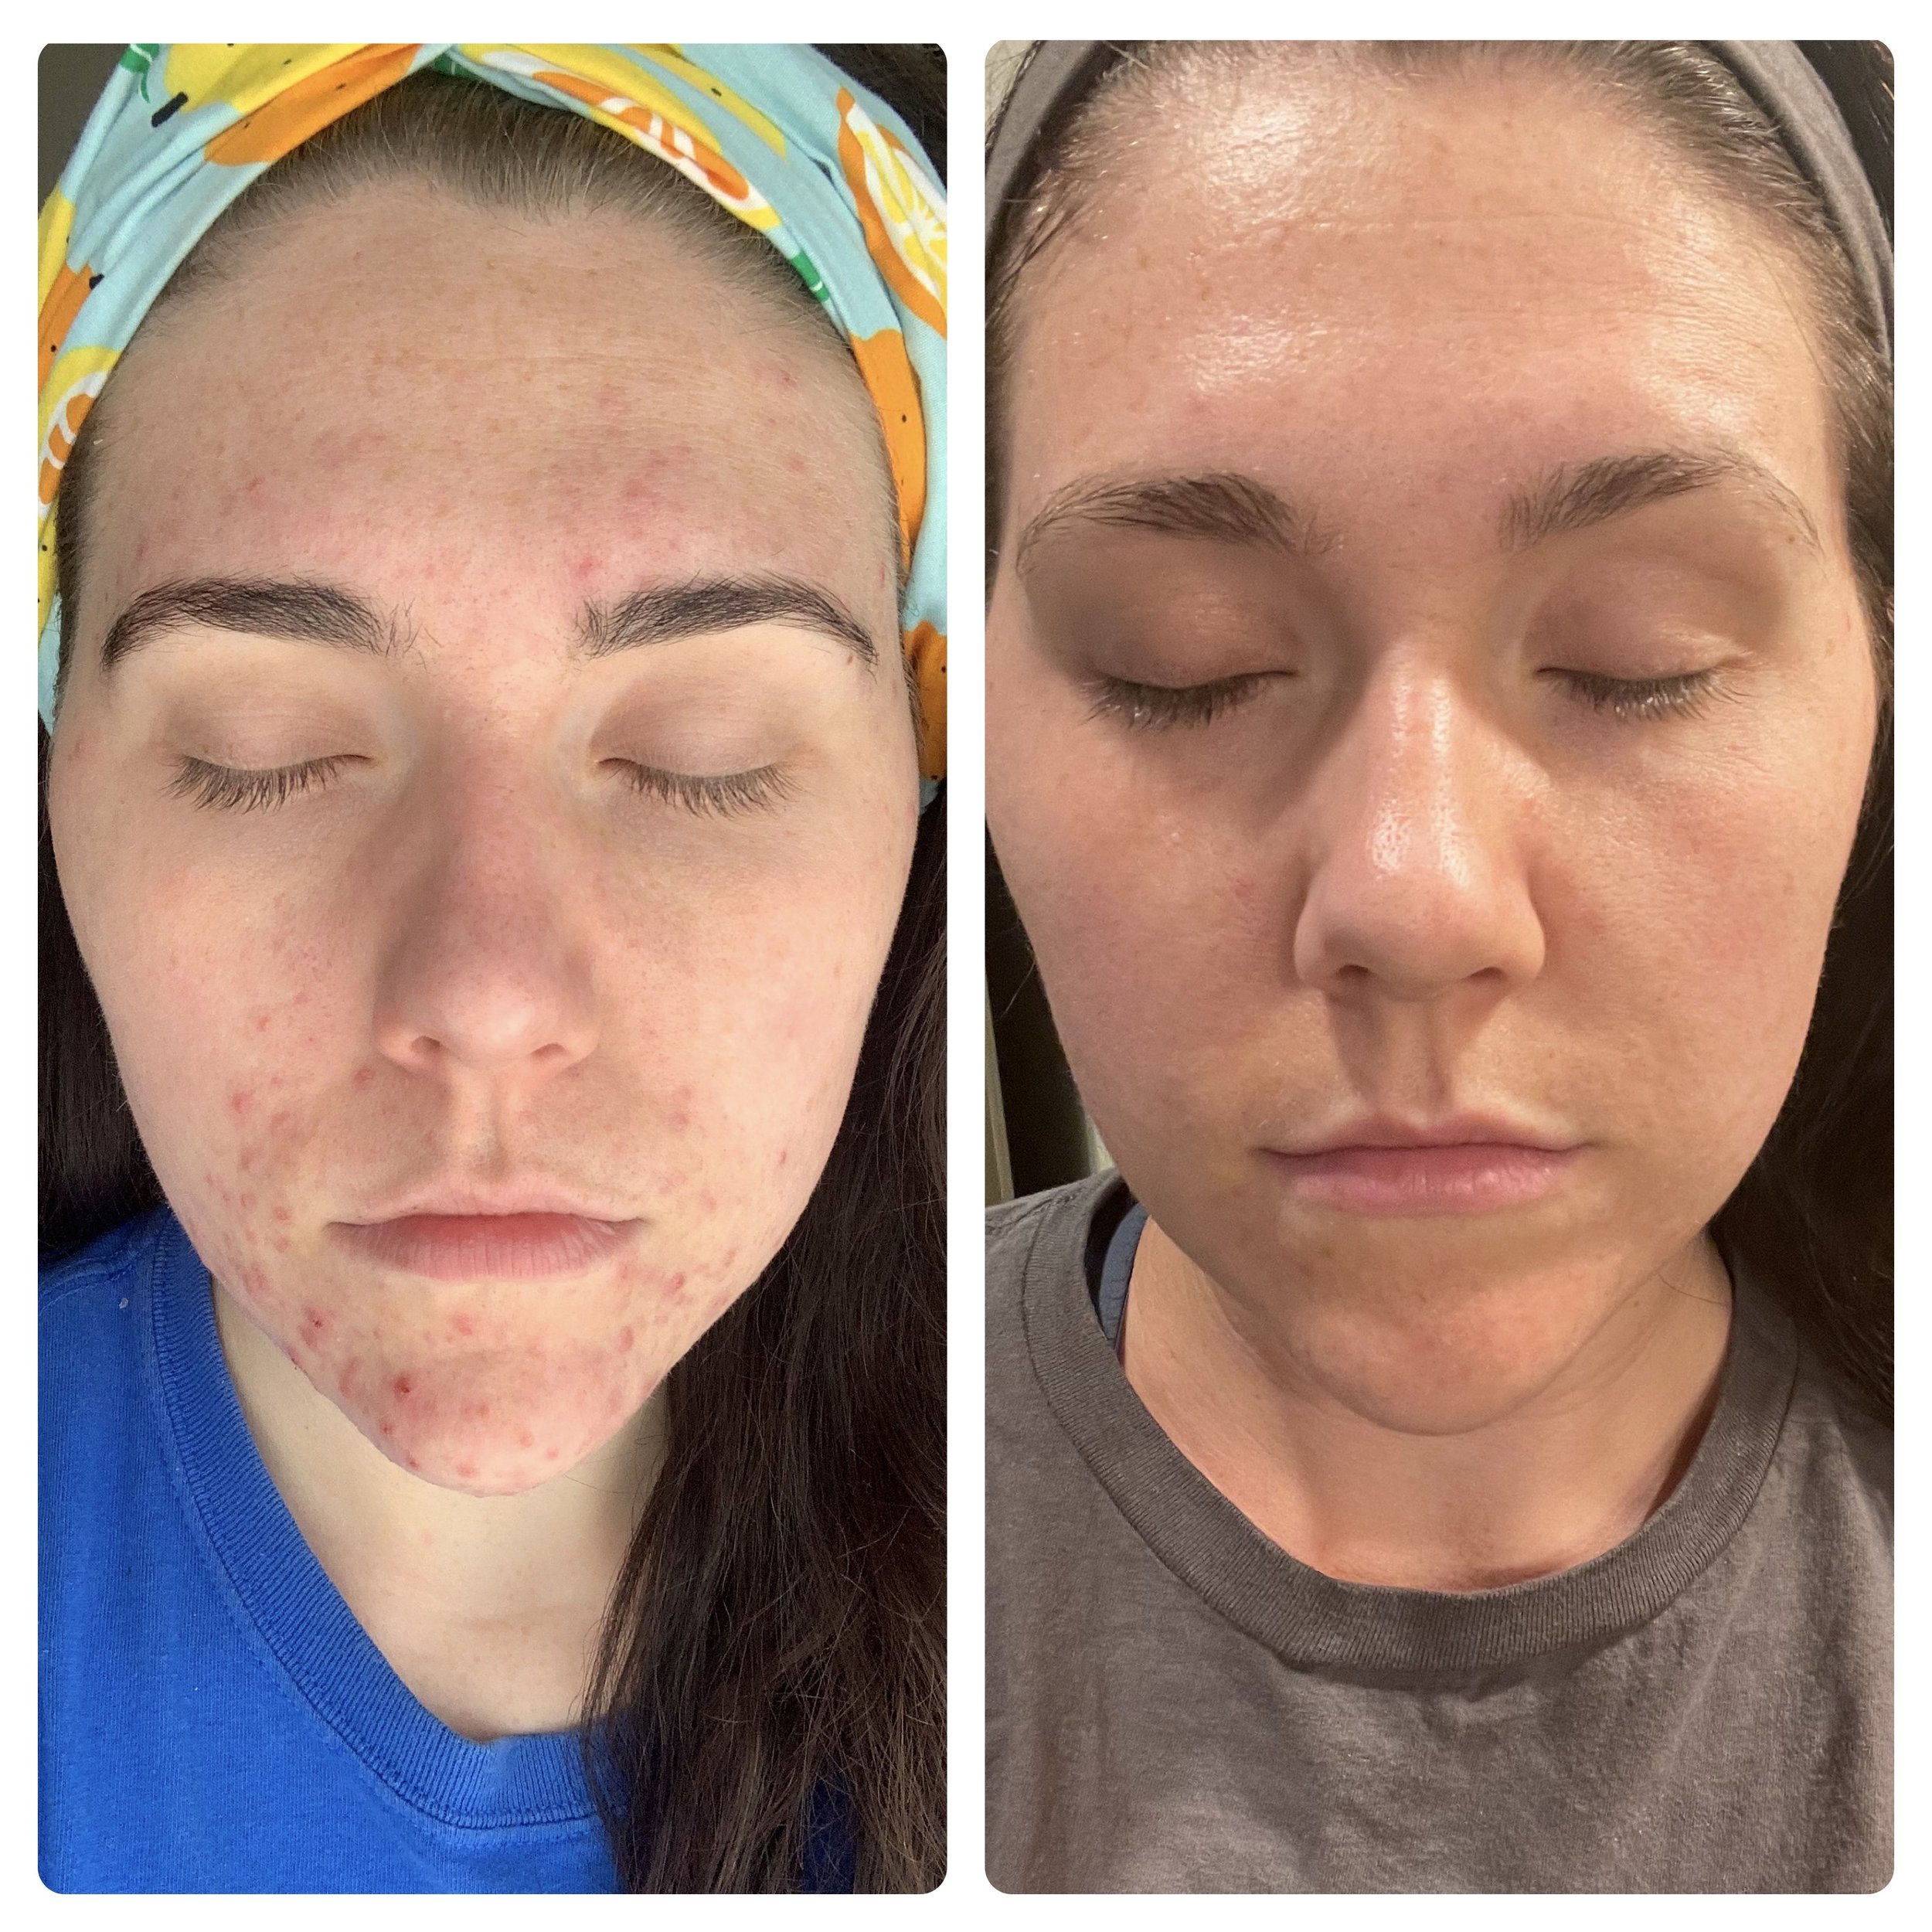 My Cystic Acne Story And How I Healed